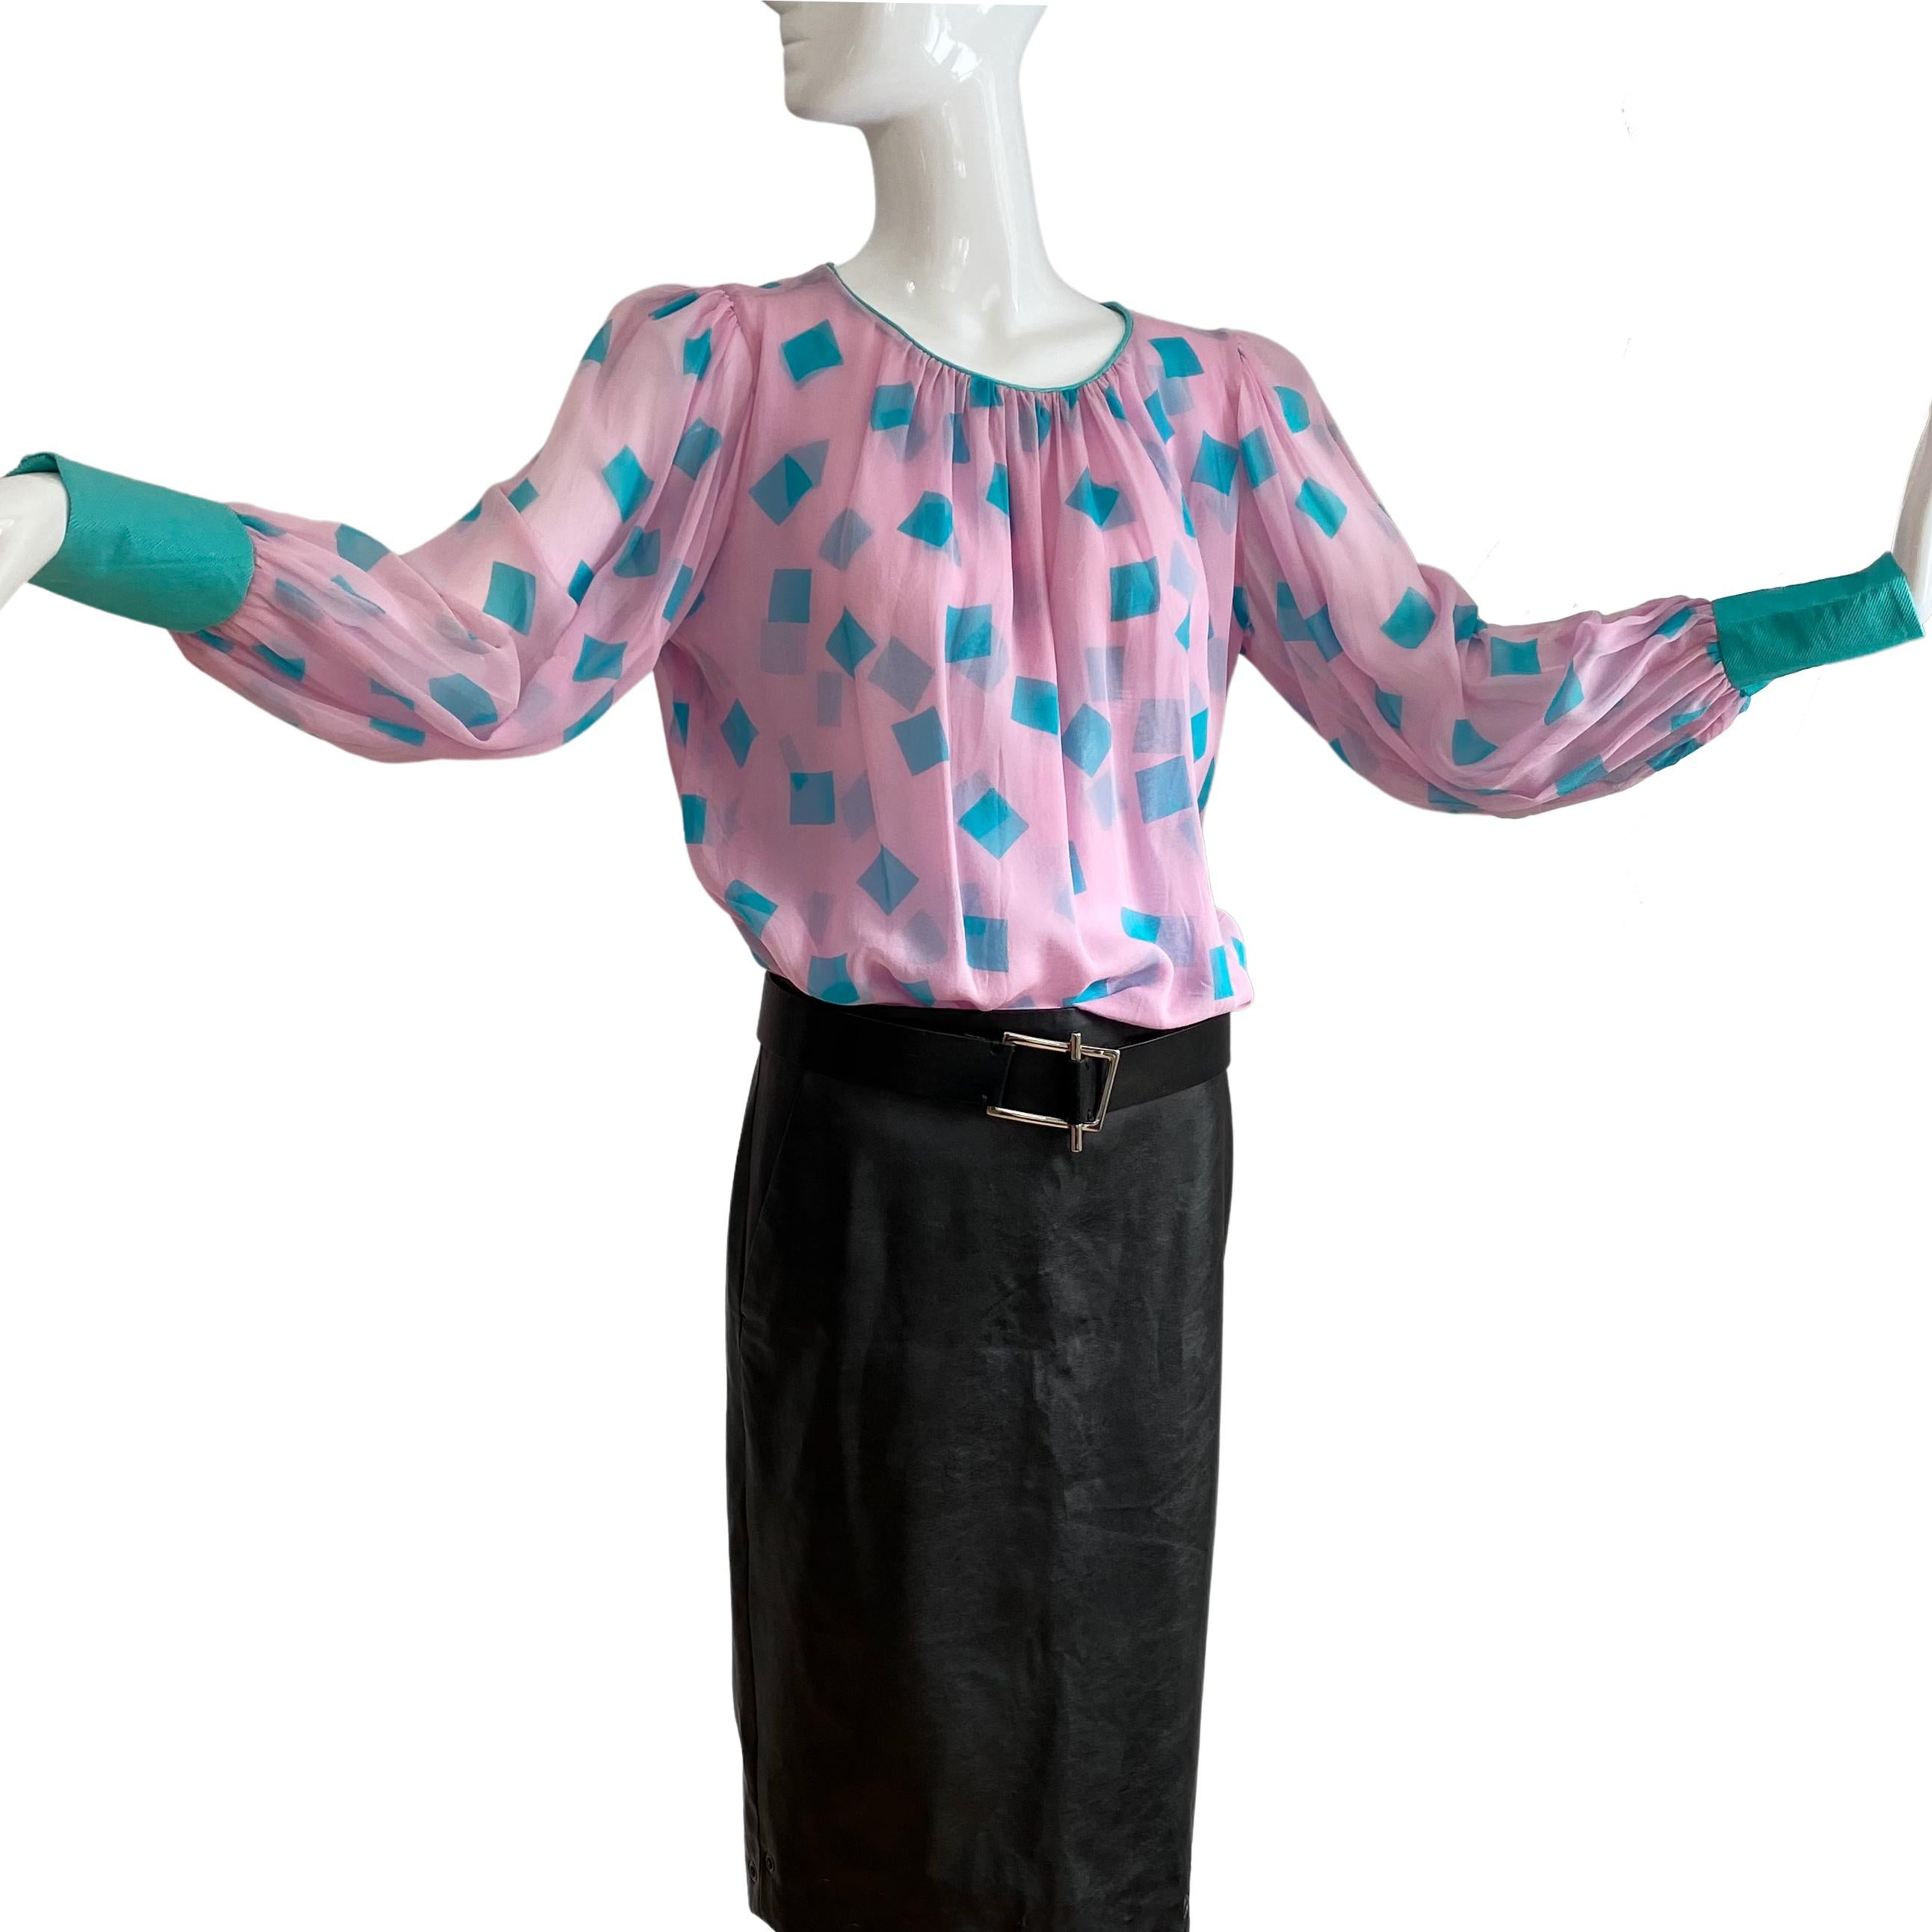 Pink silk blouse with mint green cubes.
Bodice is double layered.
Vintage design but brand New With Tag
Material: Long-filament printed 100% Silk mousseline with mint-color silk trim.
Approximately 24